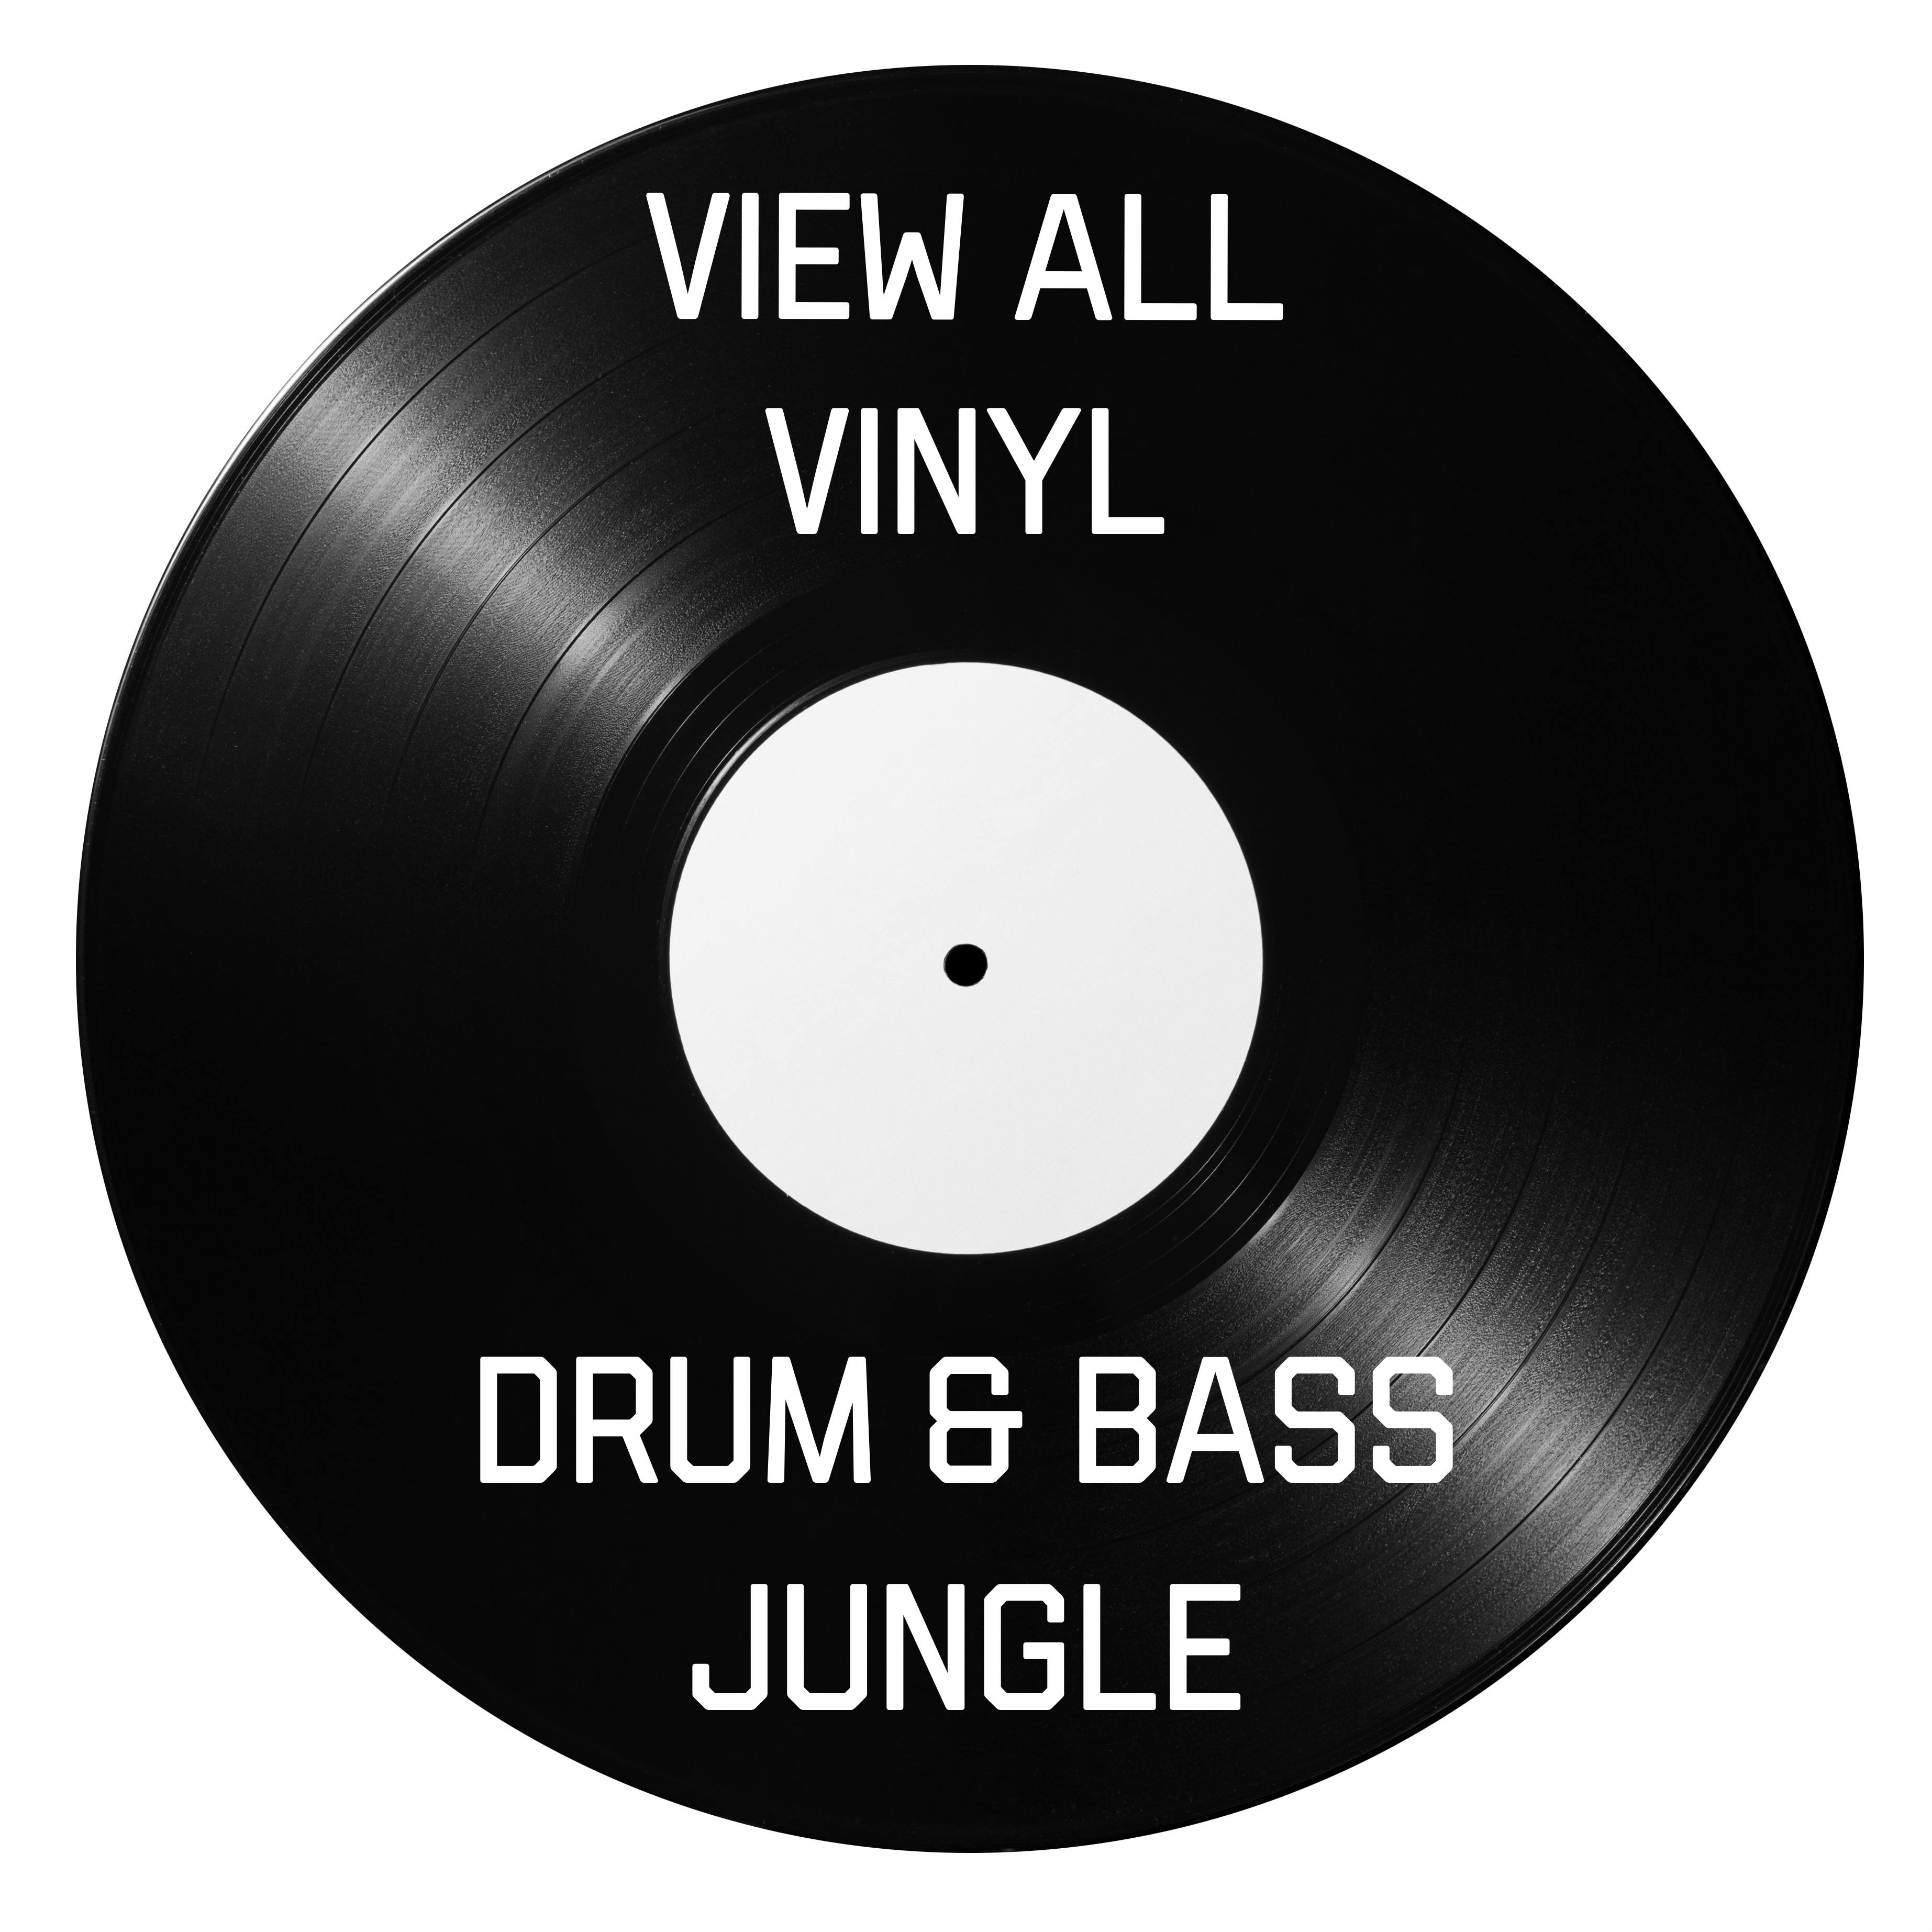 millimeter Overfrakke sirene Drum & Bass and Jungle Vinyl – Take It From The Top